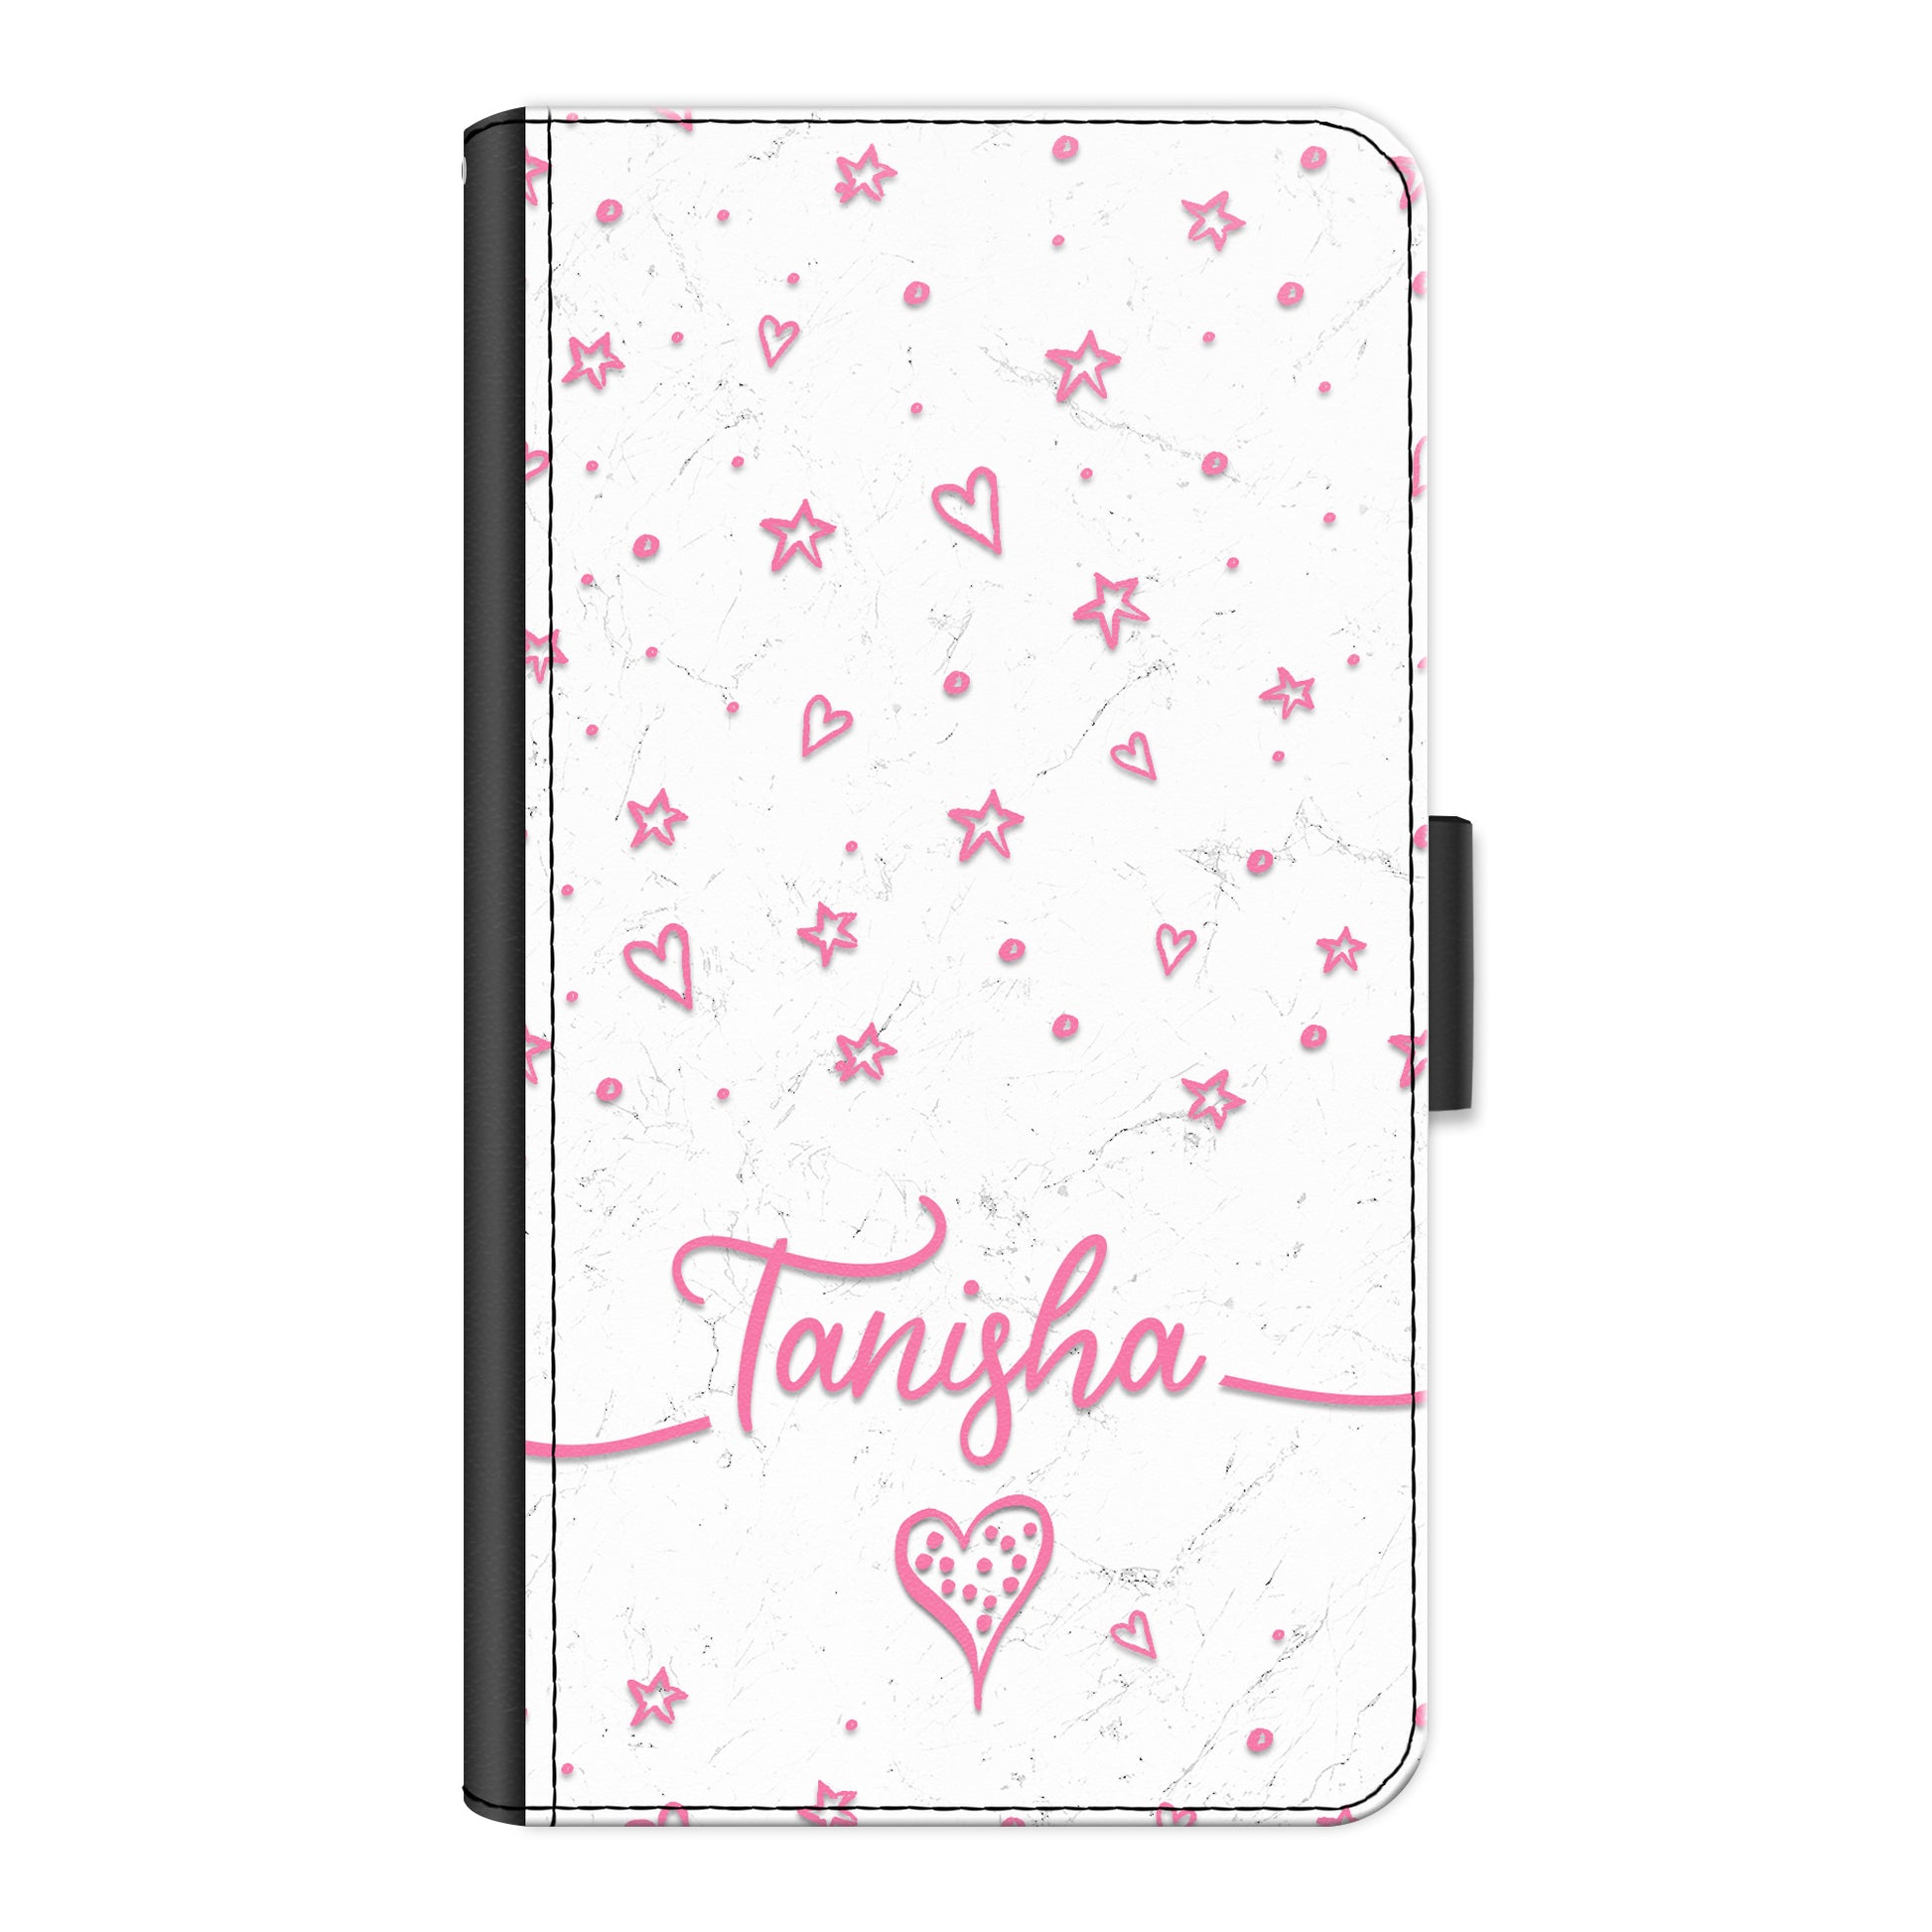 Personalised One Phone Leather Wallet with Pink Stylish text, Stars and Hearts on White Marble